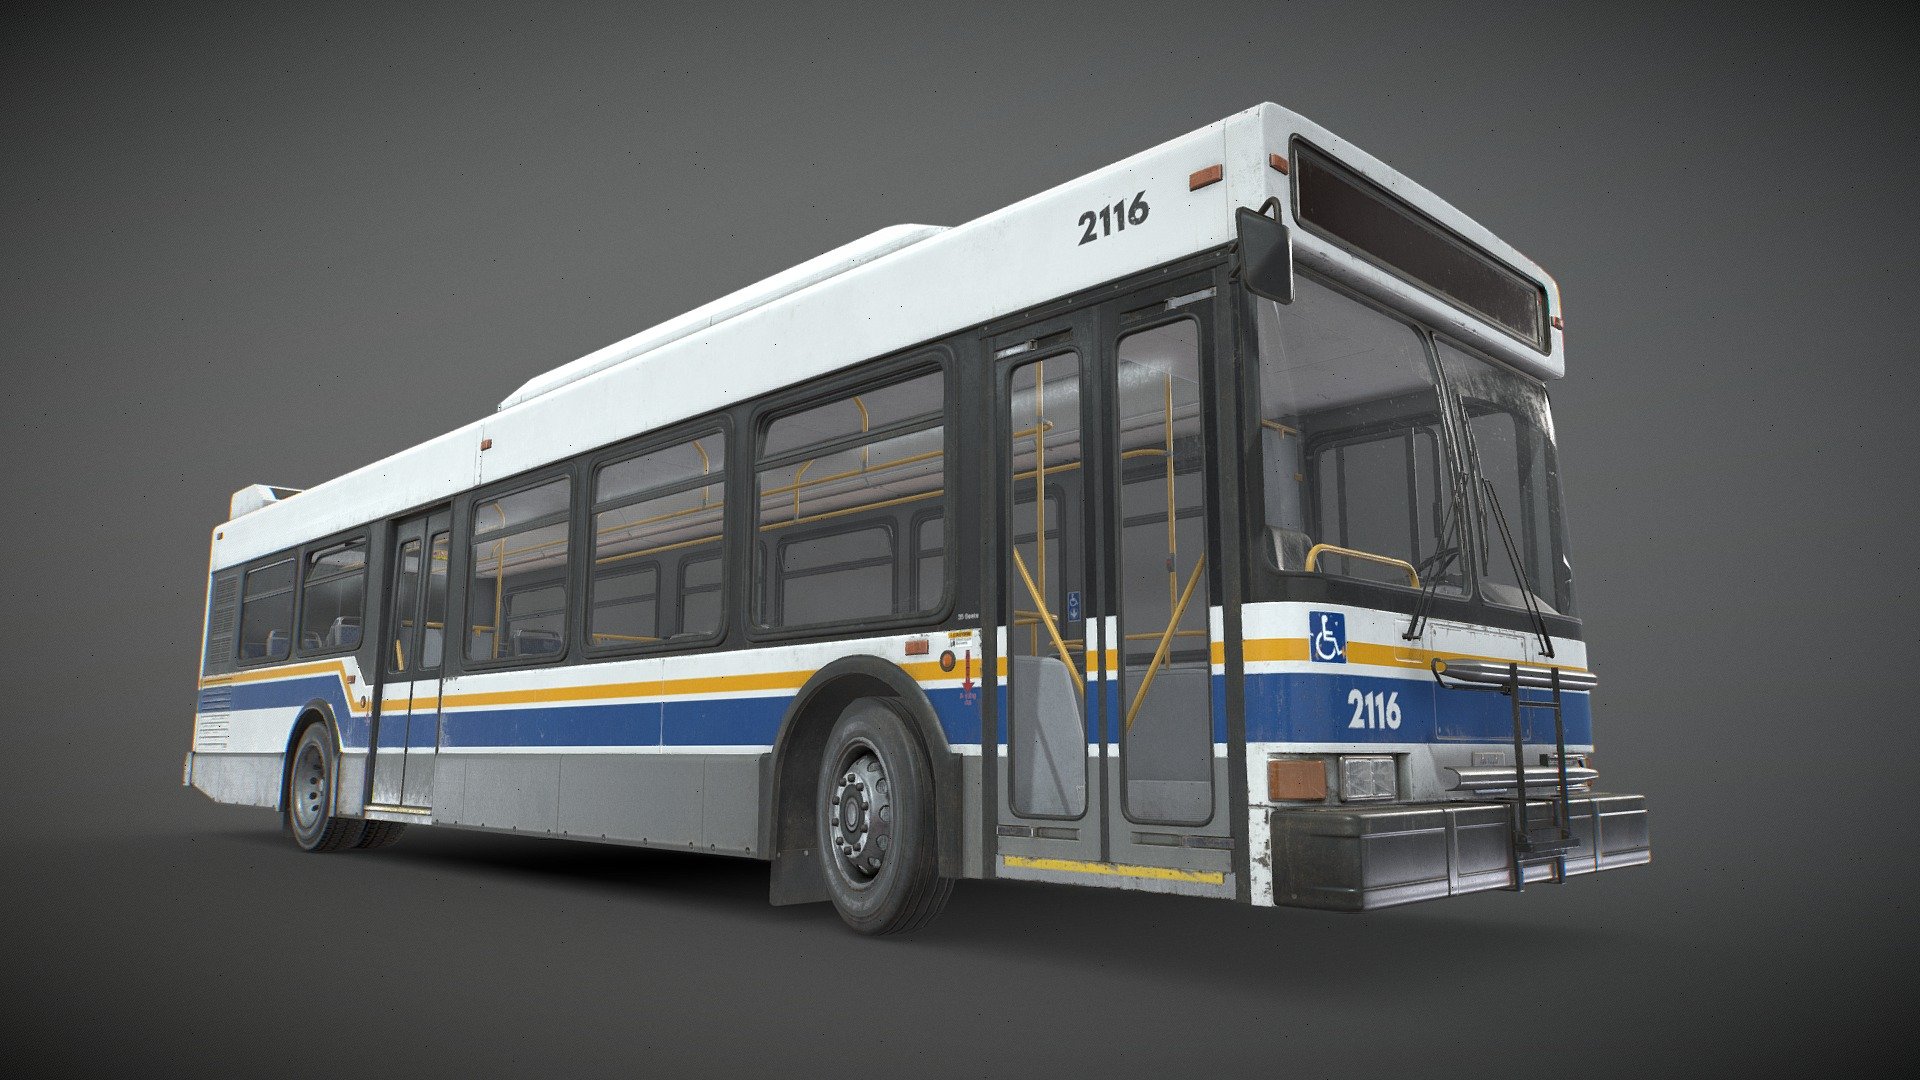 Generic City Transit Bus 3D  low poly model:




Real-world scale and centered.

The unit of measurement used for the model is centimeters

Doors, wheels, steering wheel, windows and bike rack are separated and can be easily rigged/animated (model not animated).

Interior is a separate object to detach if needed.

PBR textures made in Substance Painter

All branding and labels are custom made.

Approx. size:  L: 12,4m  W: 2,55m  H: 3,25m (not including mirrors)

Version with open doors also included

Total Polys:  18.711 (36.331 tris)

Maps sizes: 




Body: 4096x4096

Details: 4096x4096

Interior: 4096x4096

Wheels: 2048x2048

Glass: 2048x2048

Decals: 2048x2048

Provided Maps:




Albedo 

Normal

Roughness

Metalness

AO

Opacity included in Albedo (glass and decals)

Emissive

Formats Incuded - MAX / BLEND / OBJ / FBX 

Packed ORM textures available uppon request

This model can be used for any game, film, personal project, etc. You may not resell or redistribute any content - City Bus - Low Poly - Buy Royalty Free 3D model by MSWoodvine 3d model